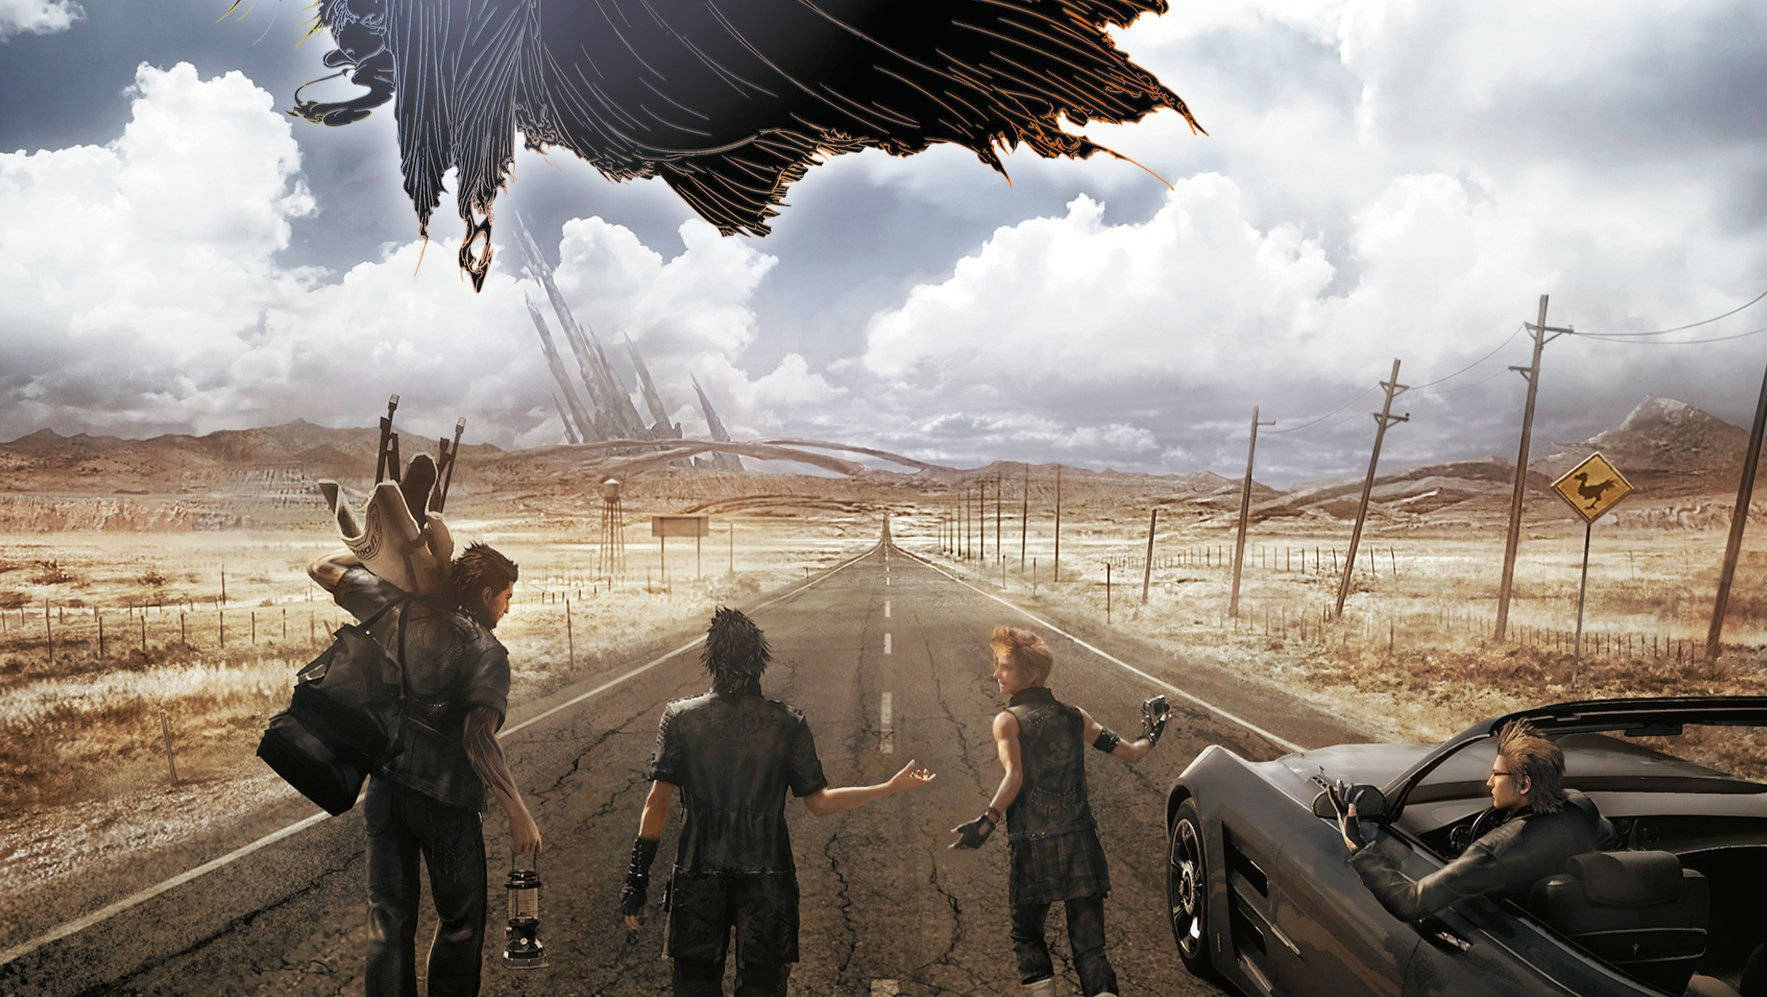 Final Fantasy Xv Noctis And Friends Wallpaper